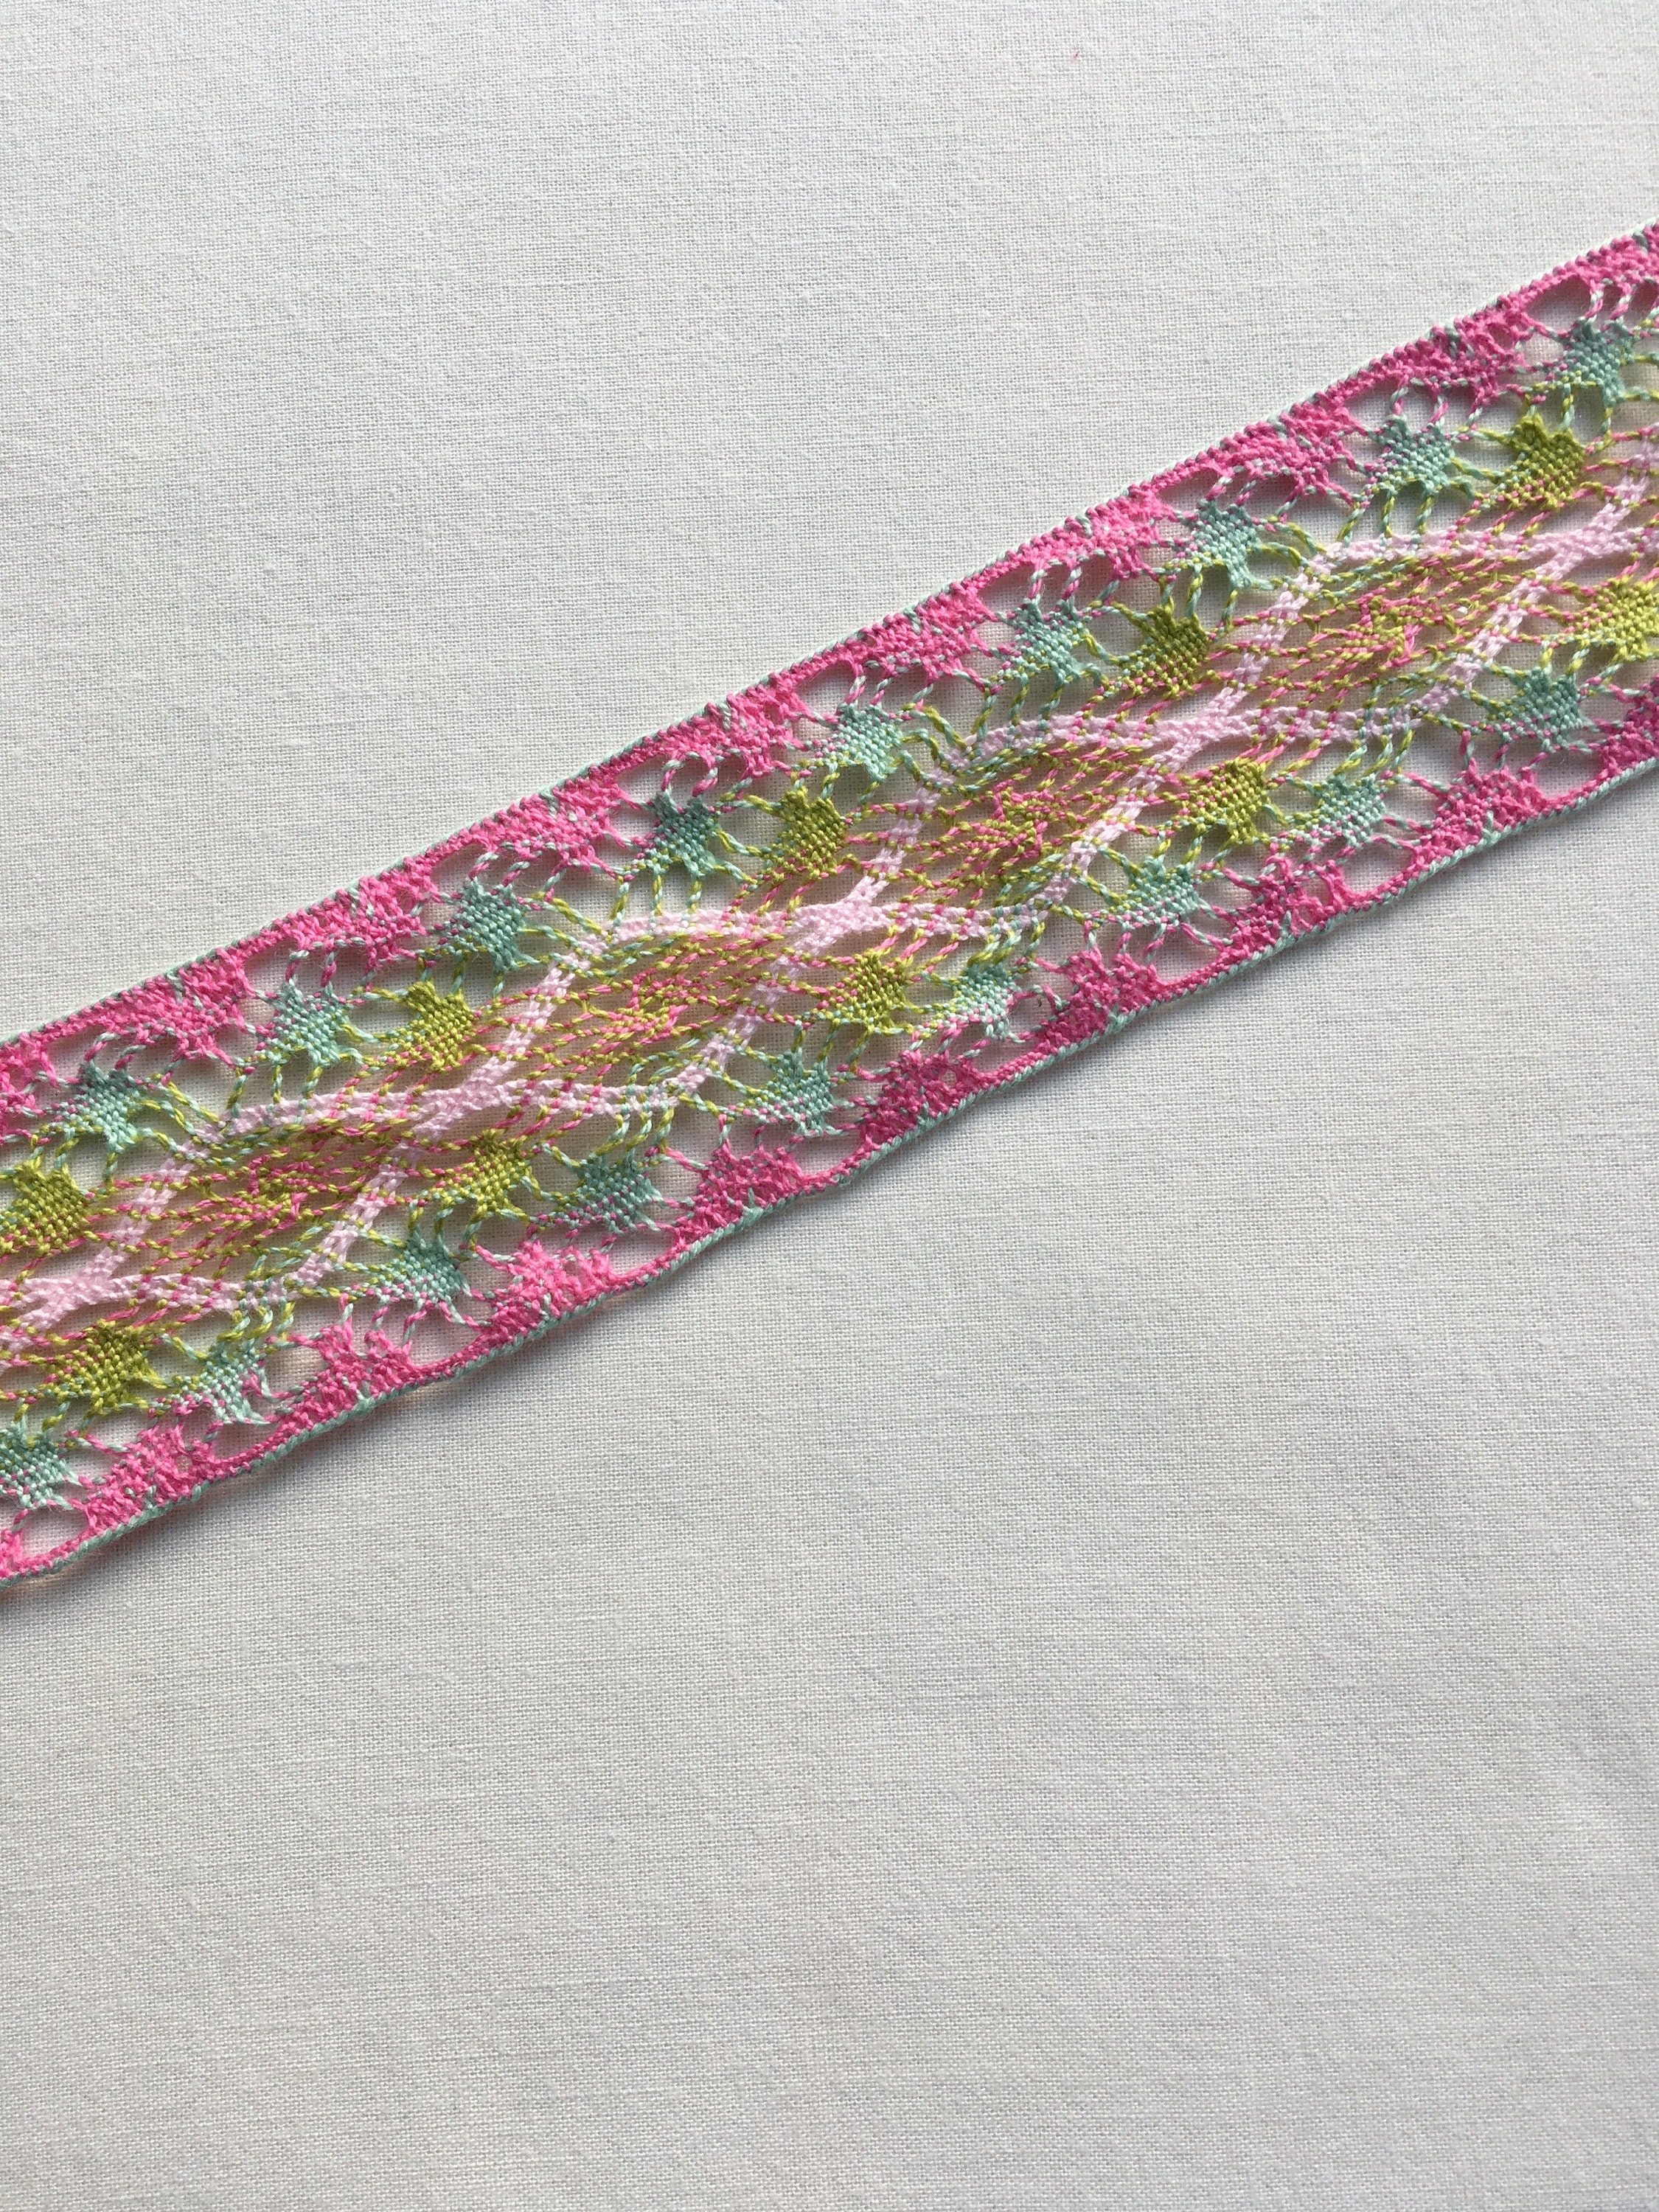 Multi Coloured Lace Trim. 45mm Wide. Made in Nottingham | Etsy UK